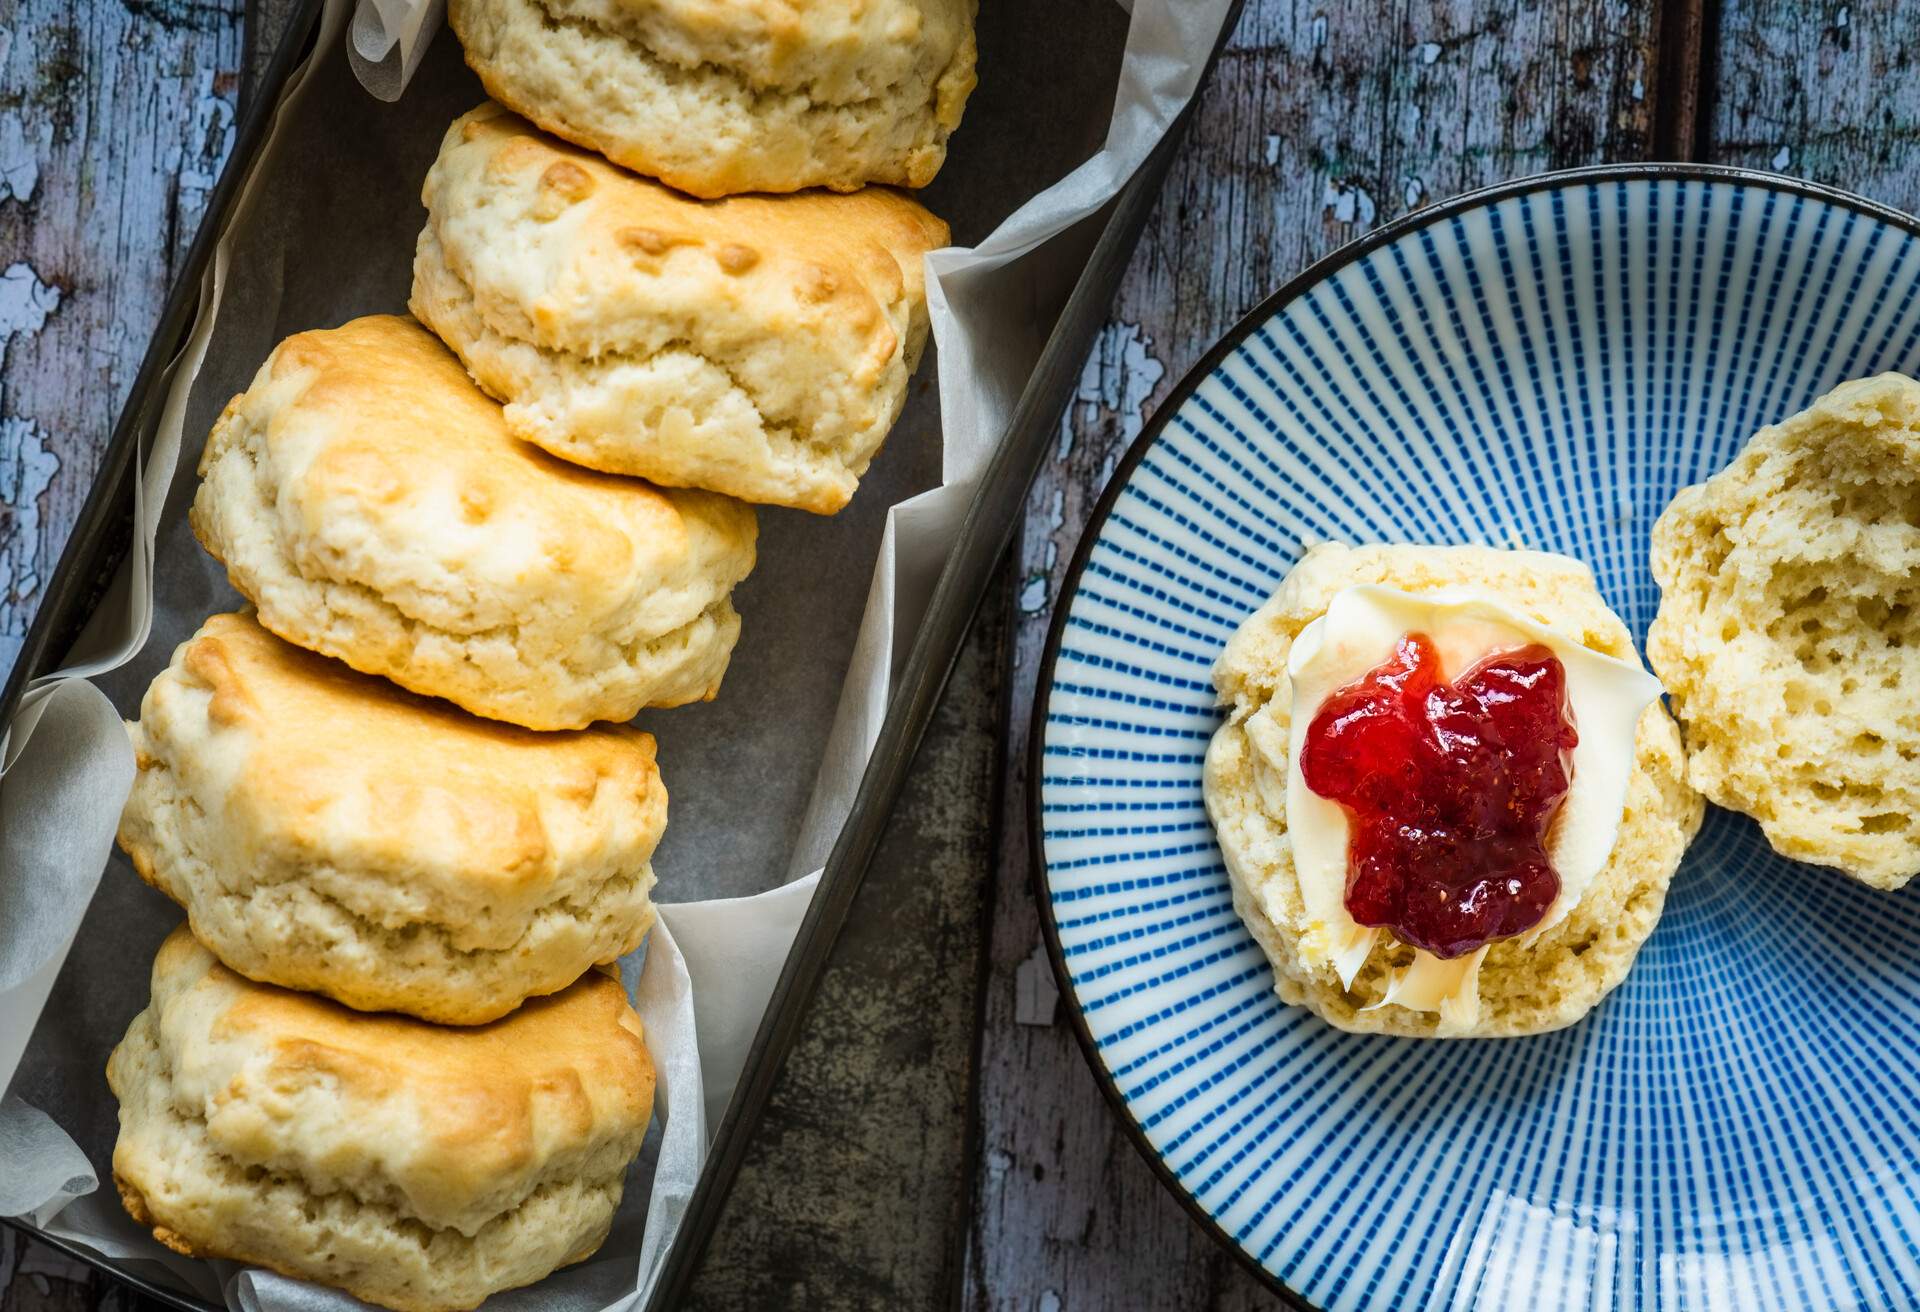 A freshly baked scone on a blue plate smothered in clotted cream and raspberry jam. 